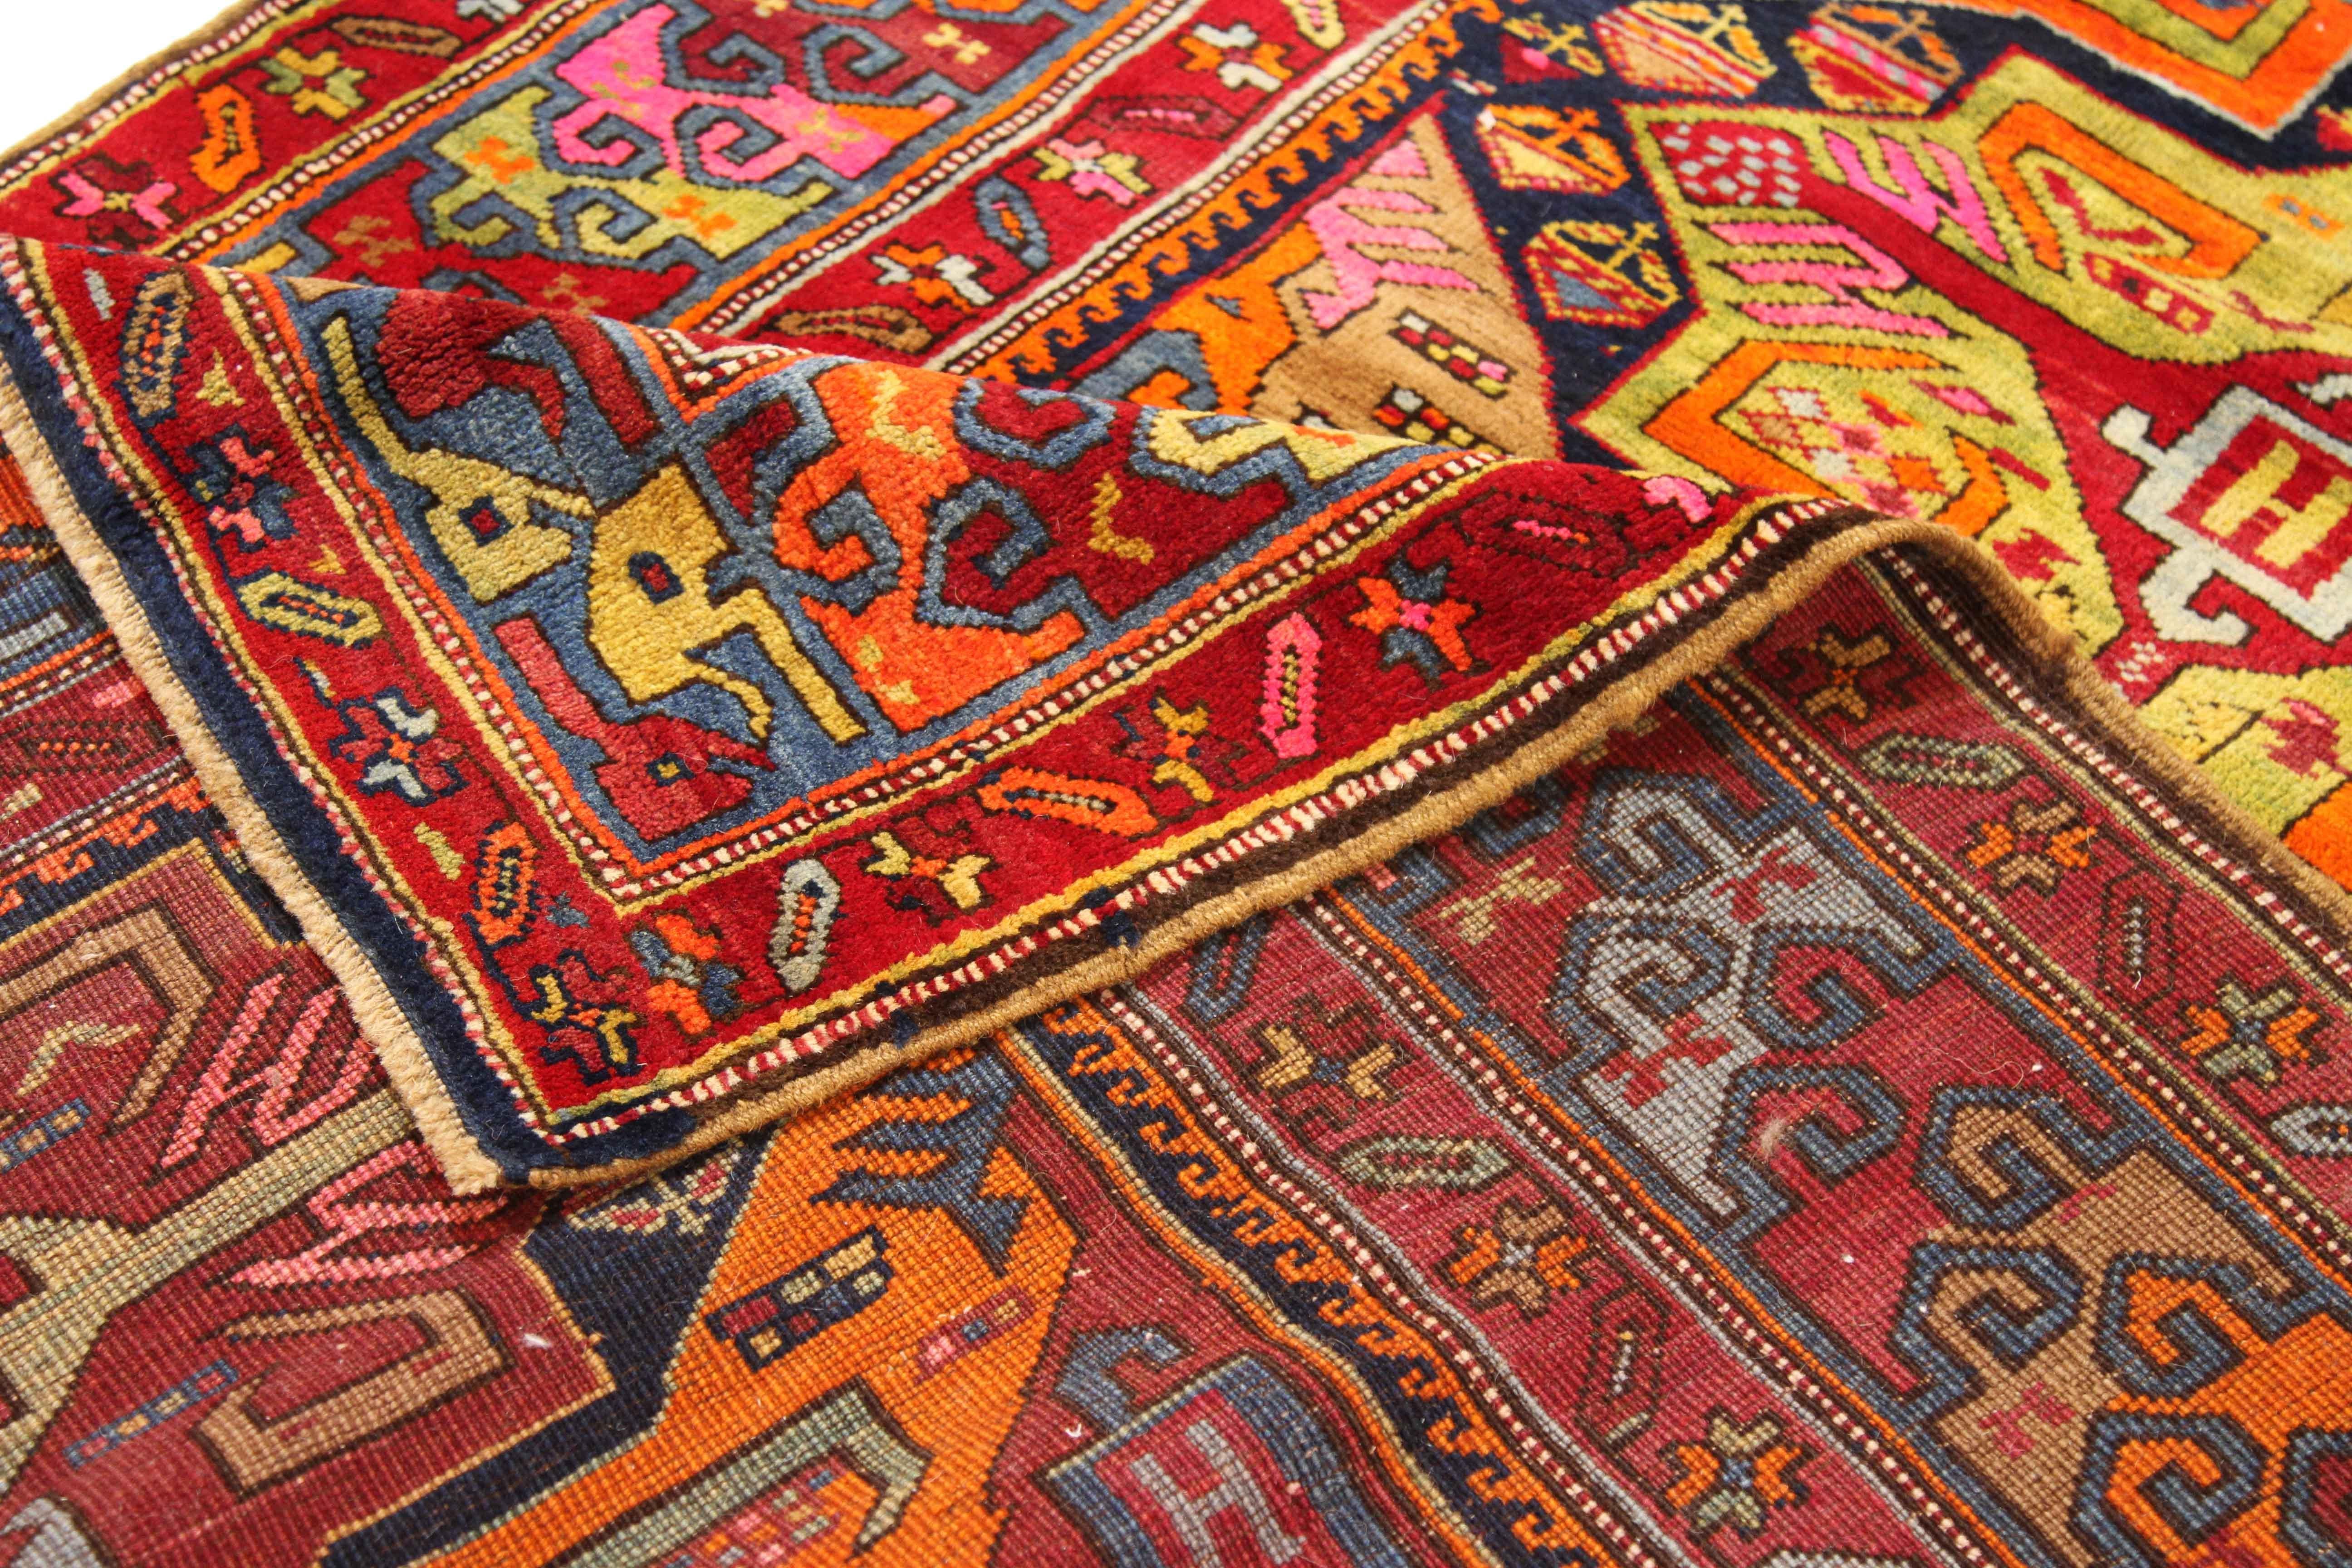 1960s antique wool rug of Persian origin. It features ornate patterns and symbols traditionally found in an Azerbaijan-made carpet. What makes this piece unique is the use of bright, pastel colors that can help accentuate contemporary, bohemian, and